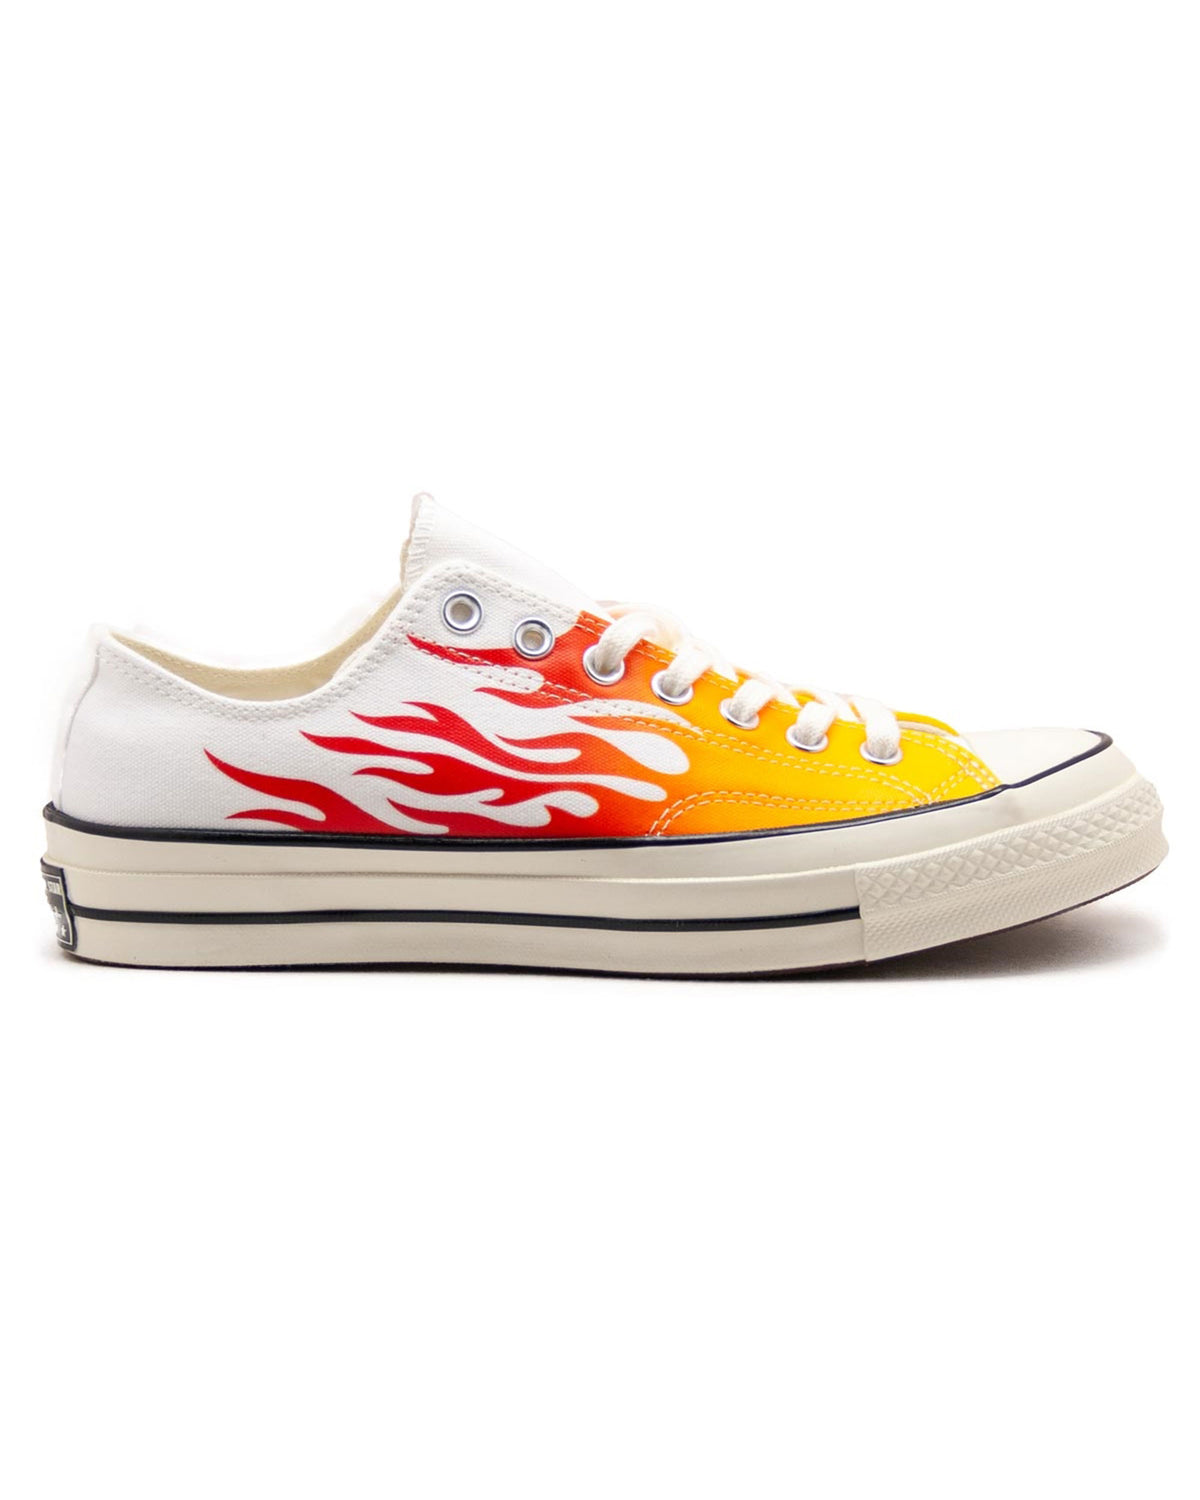 Converse Ct All Star Low '70 Flame 165029C